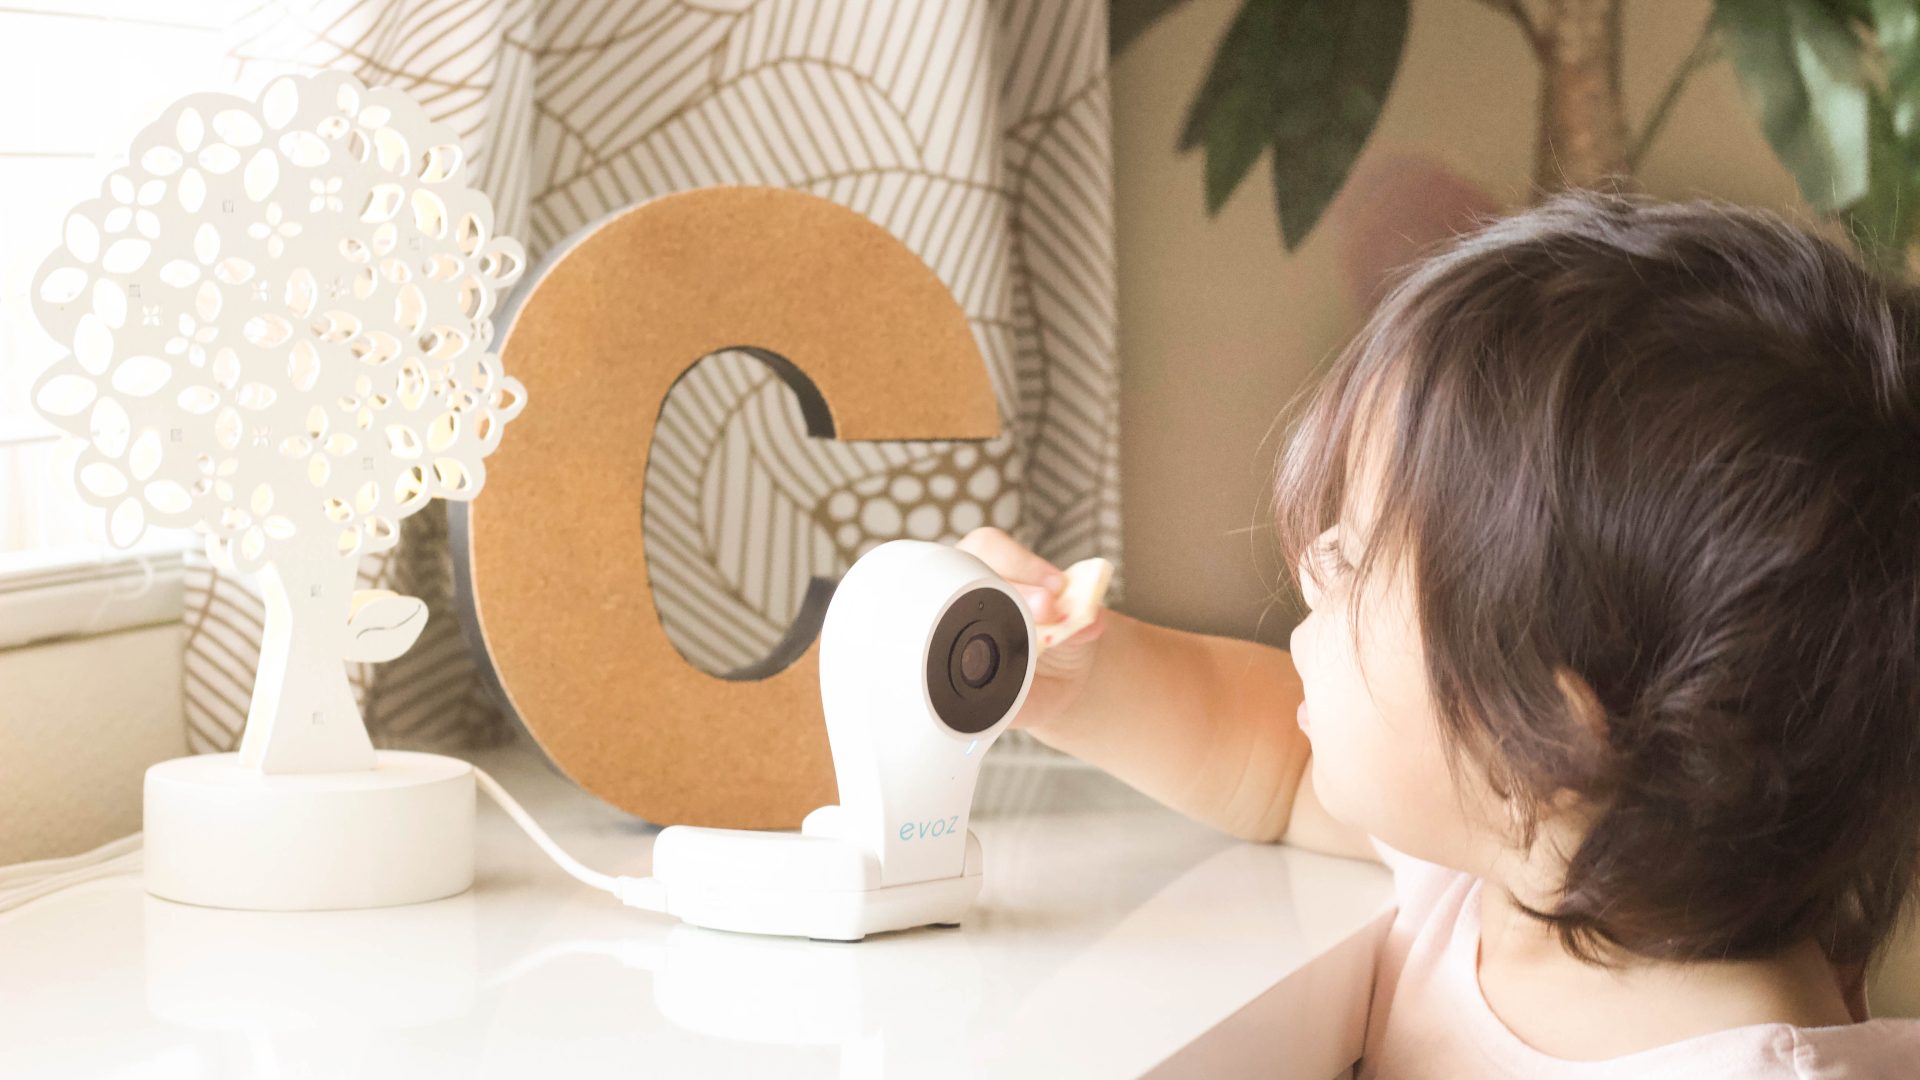 The Best Baby Monitor for Security and Safety: Evoz Vision